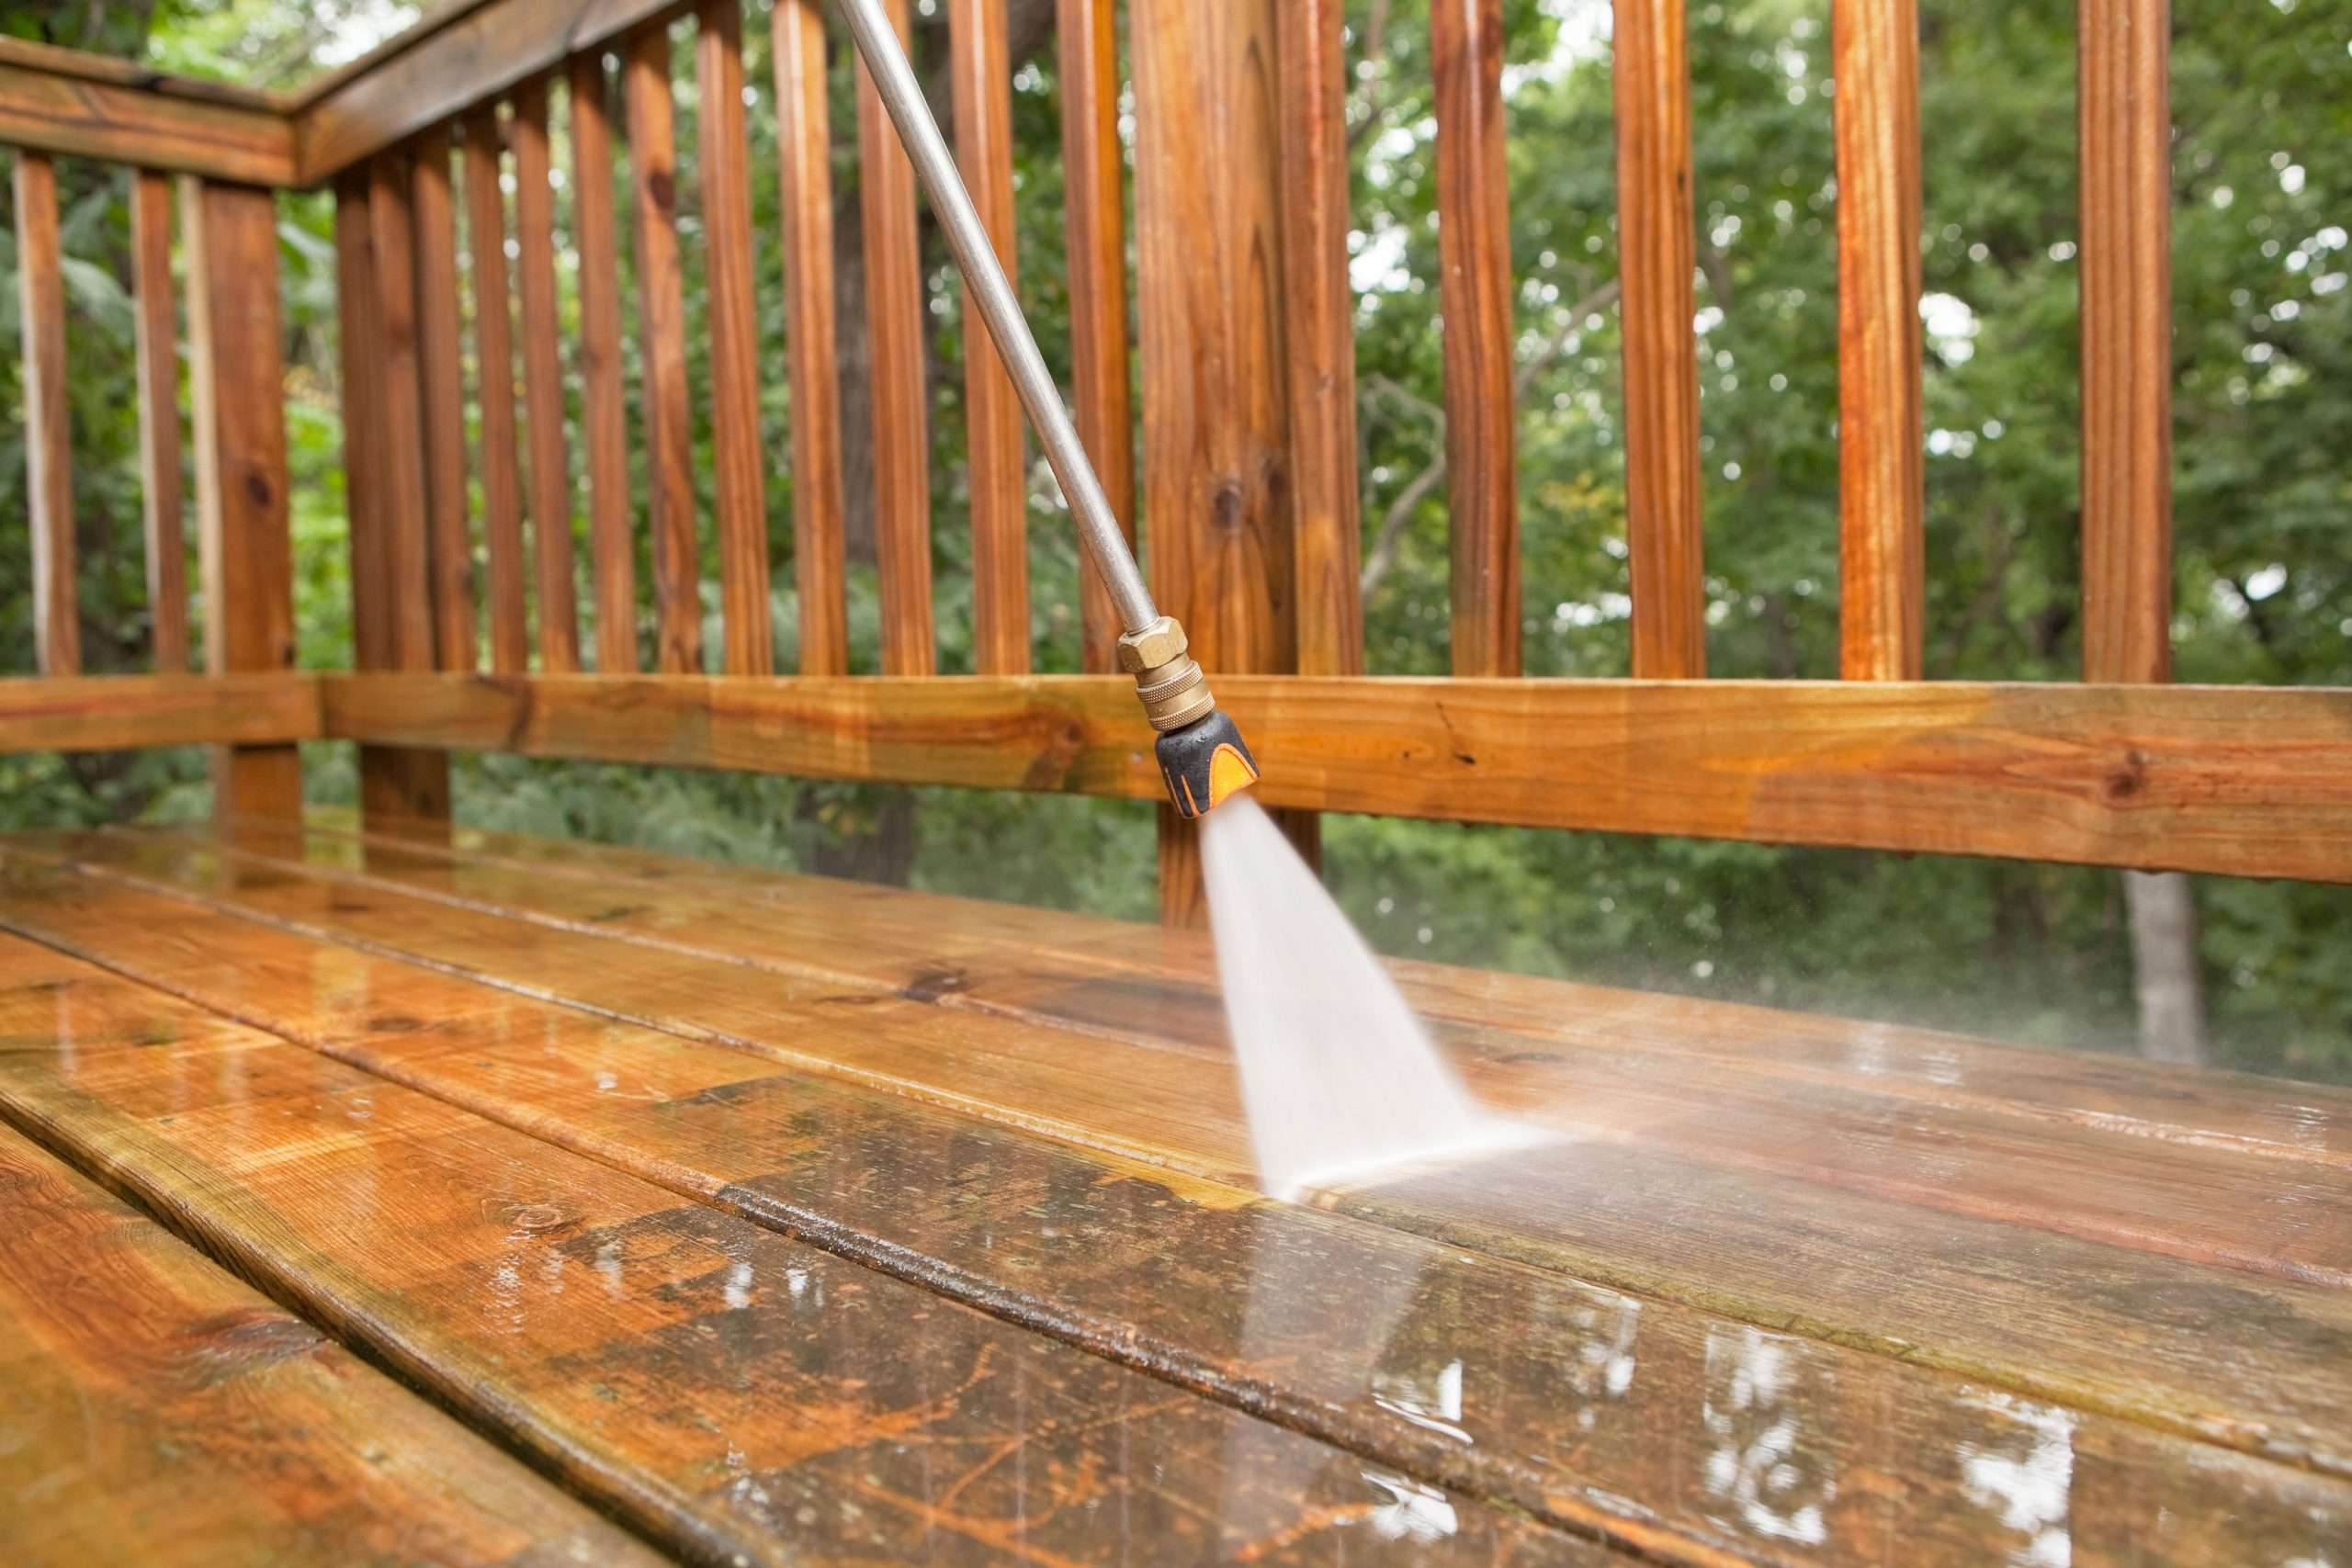 How to Power Wash a Wood Deck